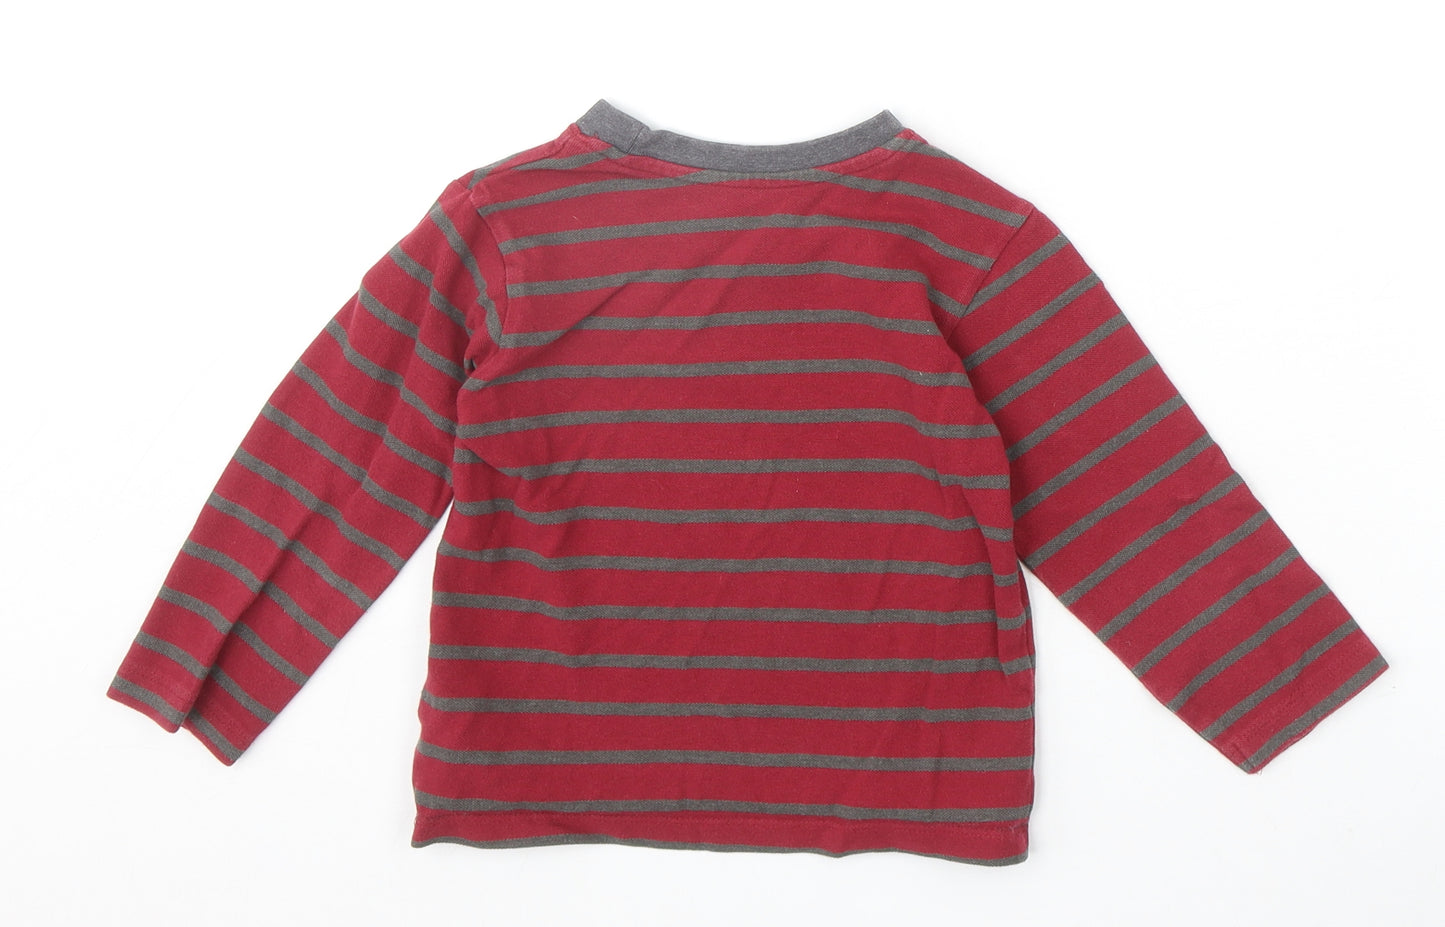 Matalan Boys Red Striped Cotton Basic T-Shirt Size 3-4 Years Round Neck Pullover